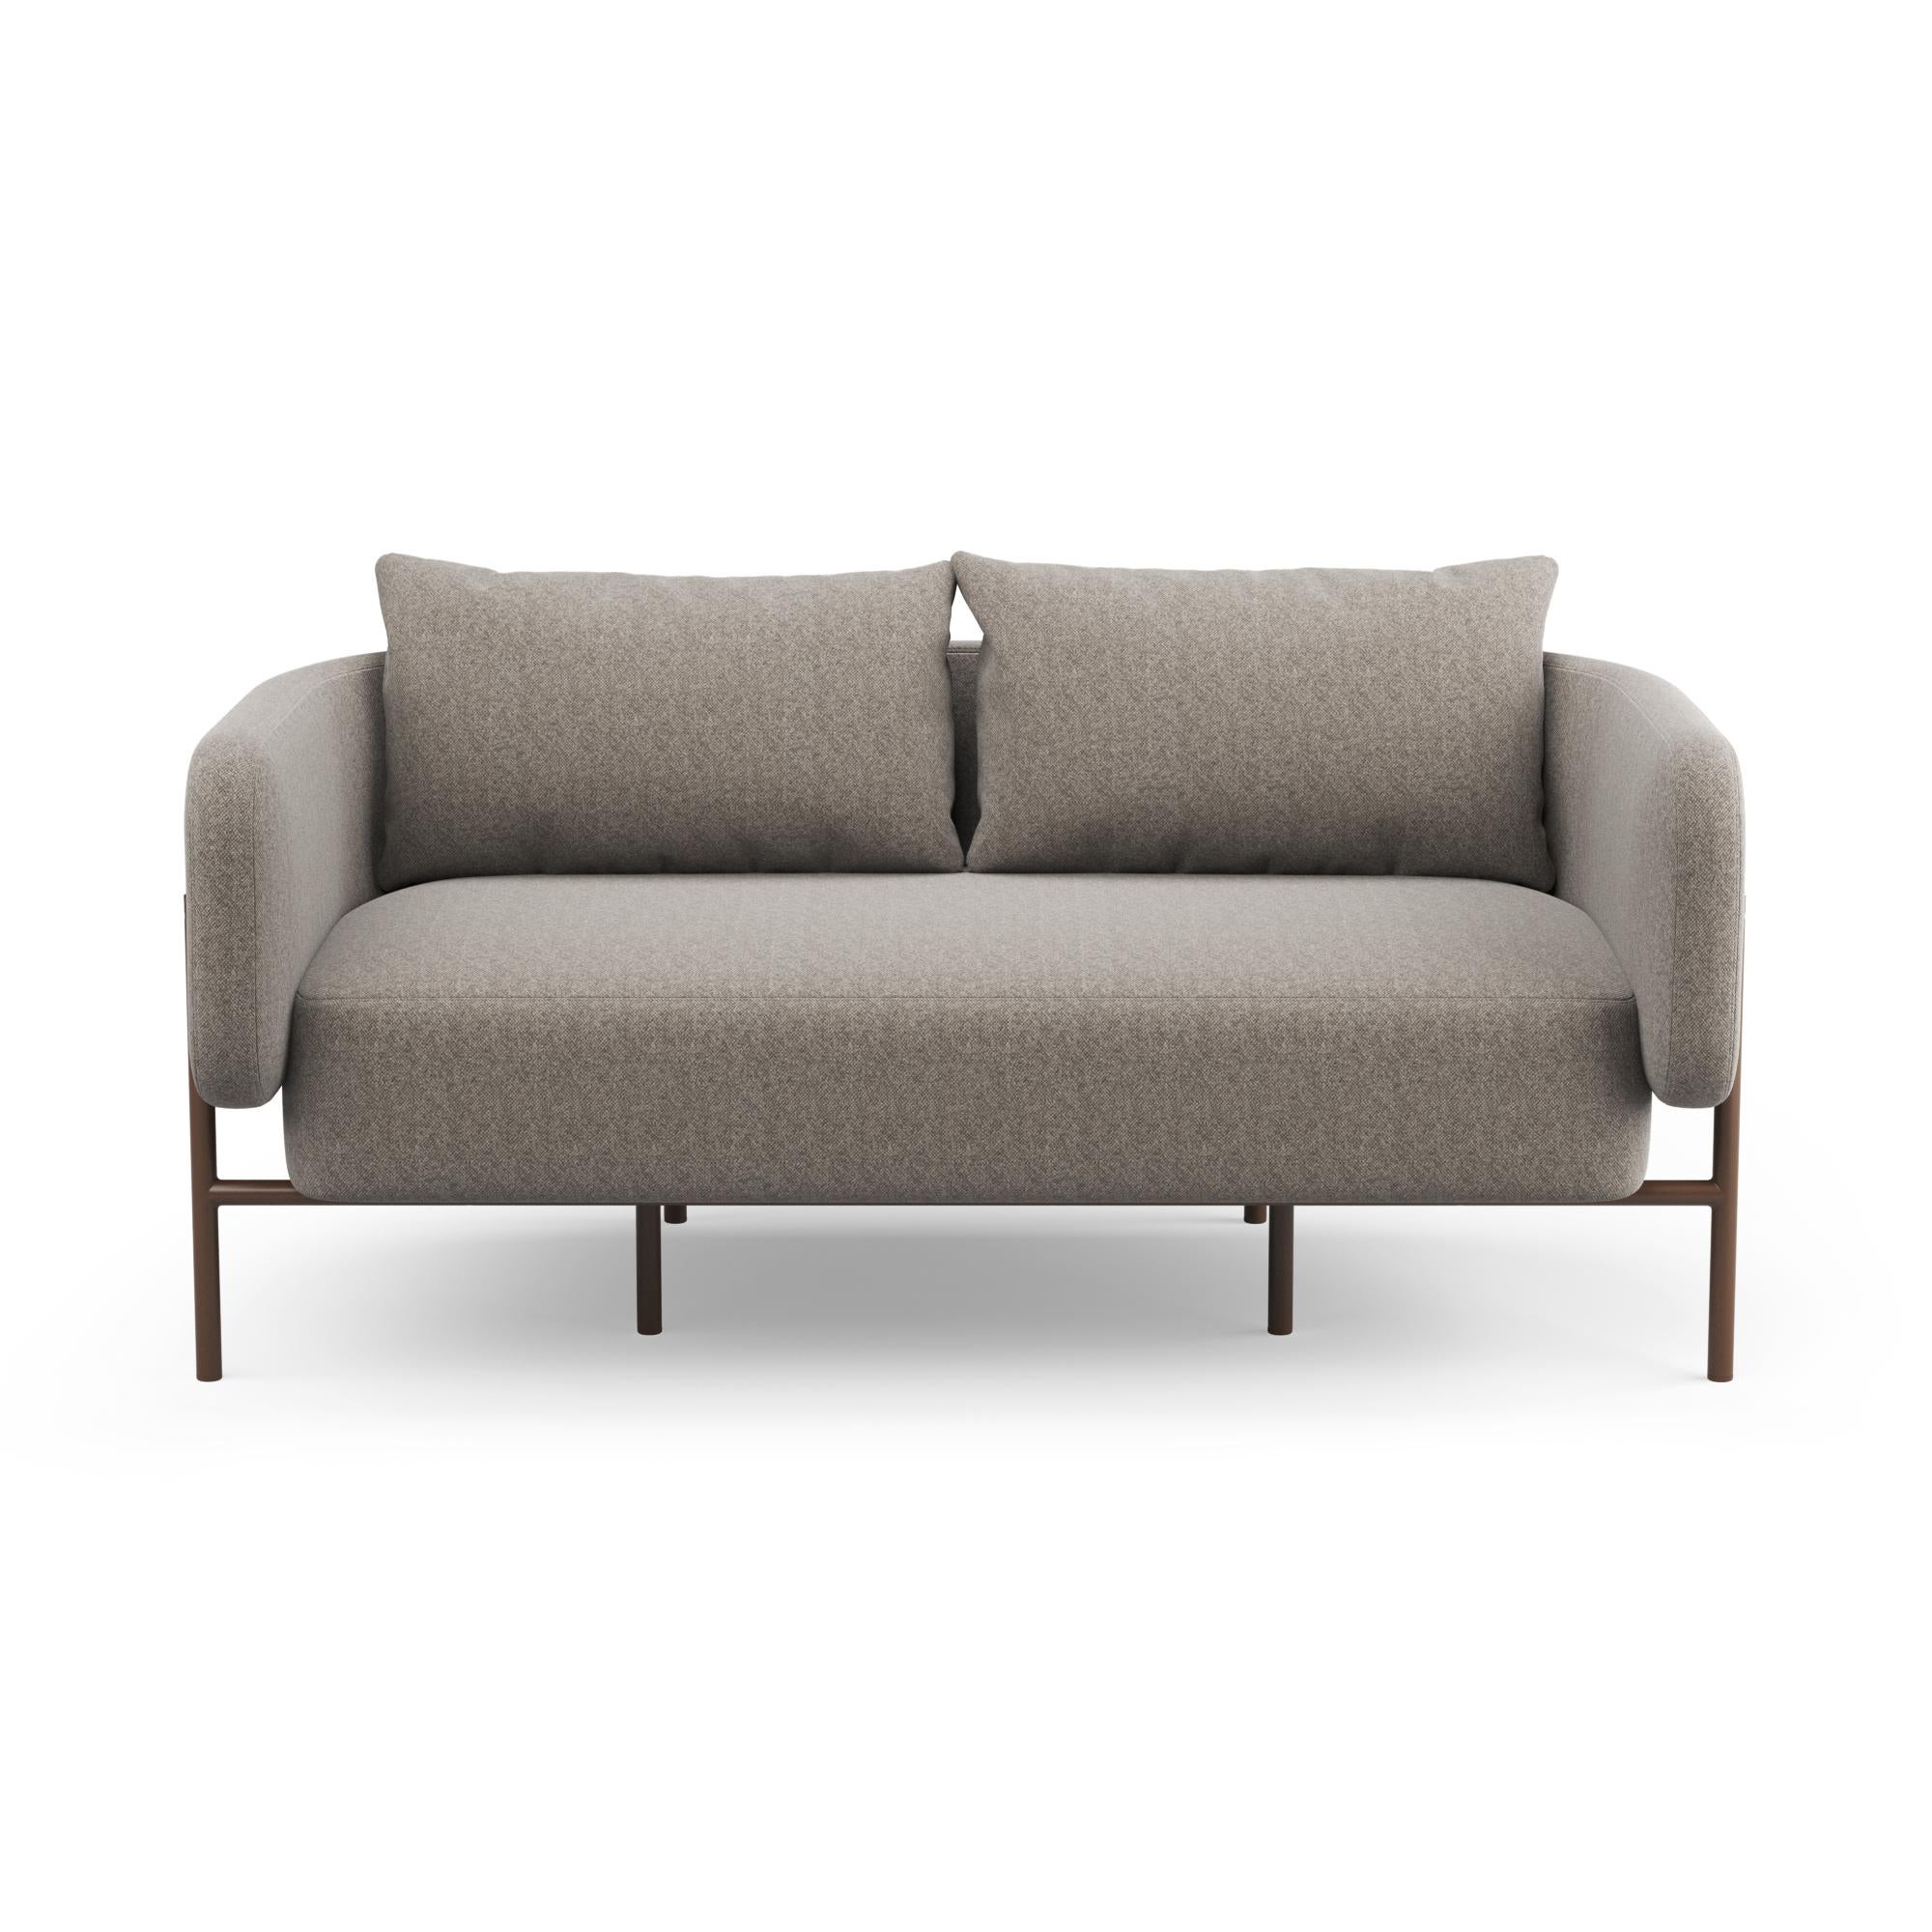 Moderne Hayche Abrazo 2 Seater Sofa - Brown, UK, Made to Order en vente